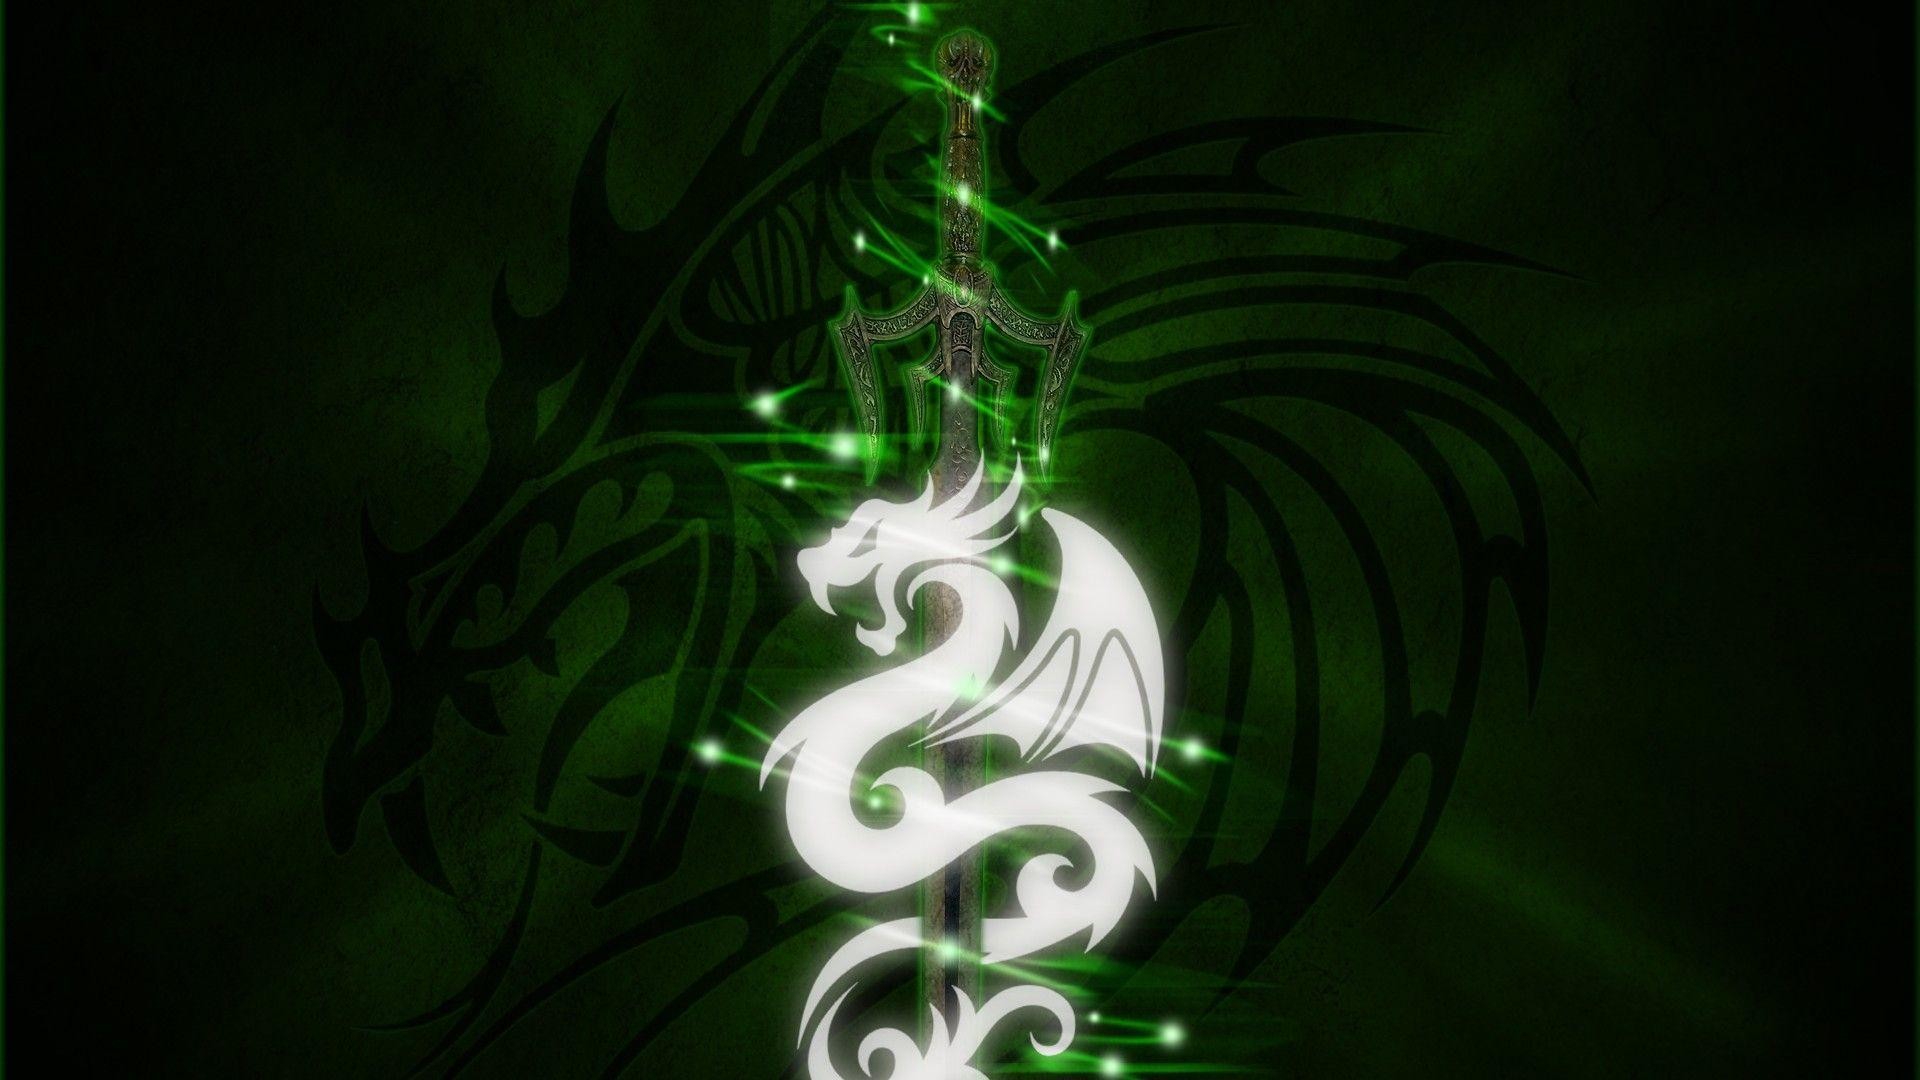 1920x1080 Wallpapers For > Green Dragon Wallpapers Hd